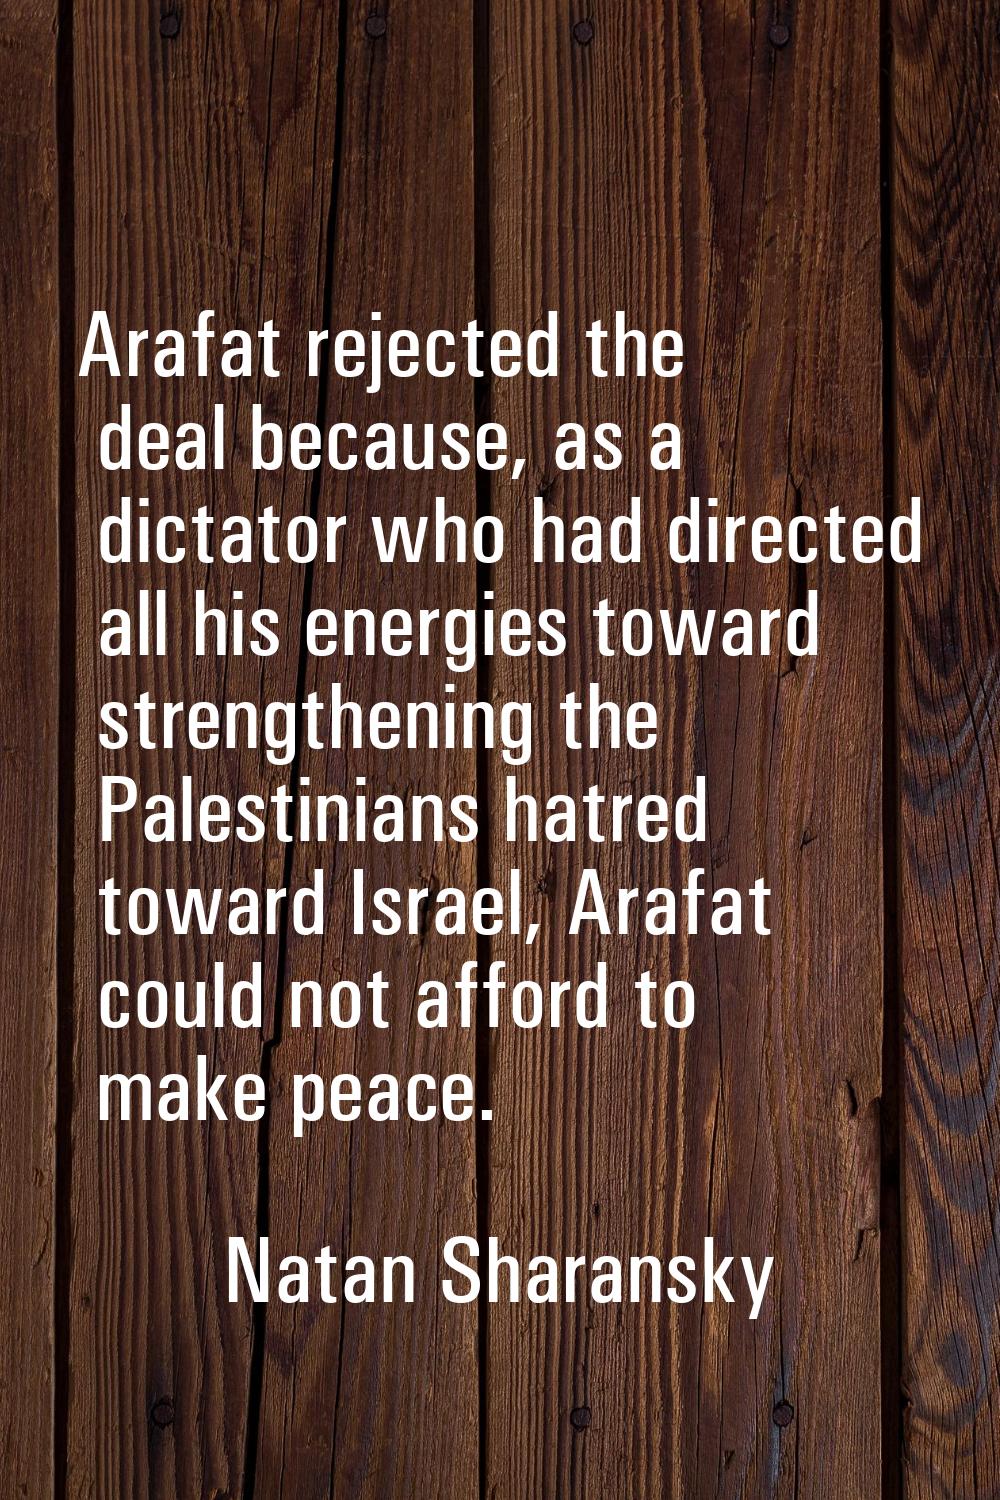 Arafat rejected the deal because, as a dictator who had directed all his energies toward strengthen